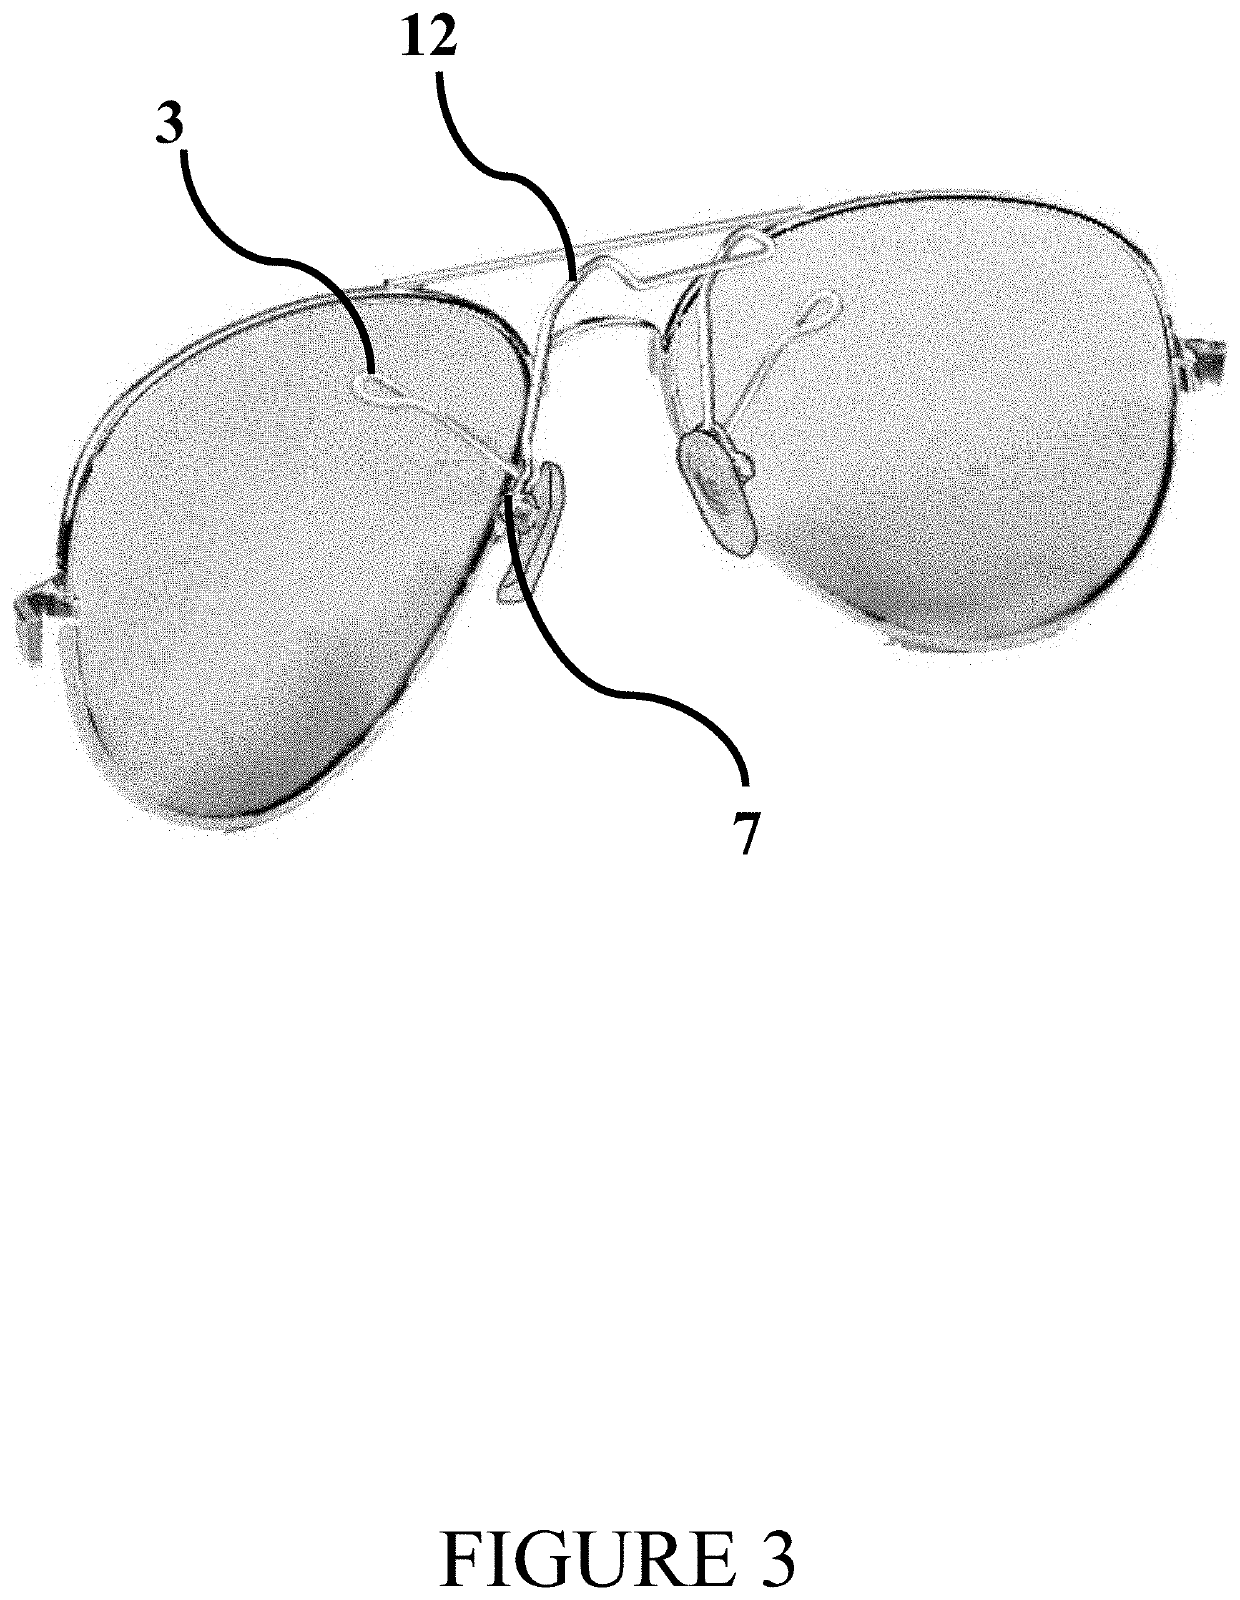 Apparatus for connecting sunglasses to prescription eyewear